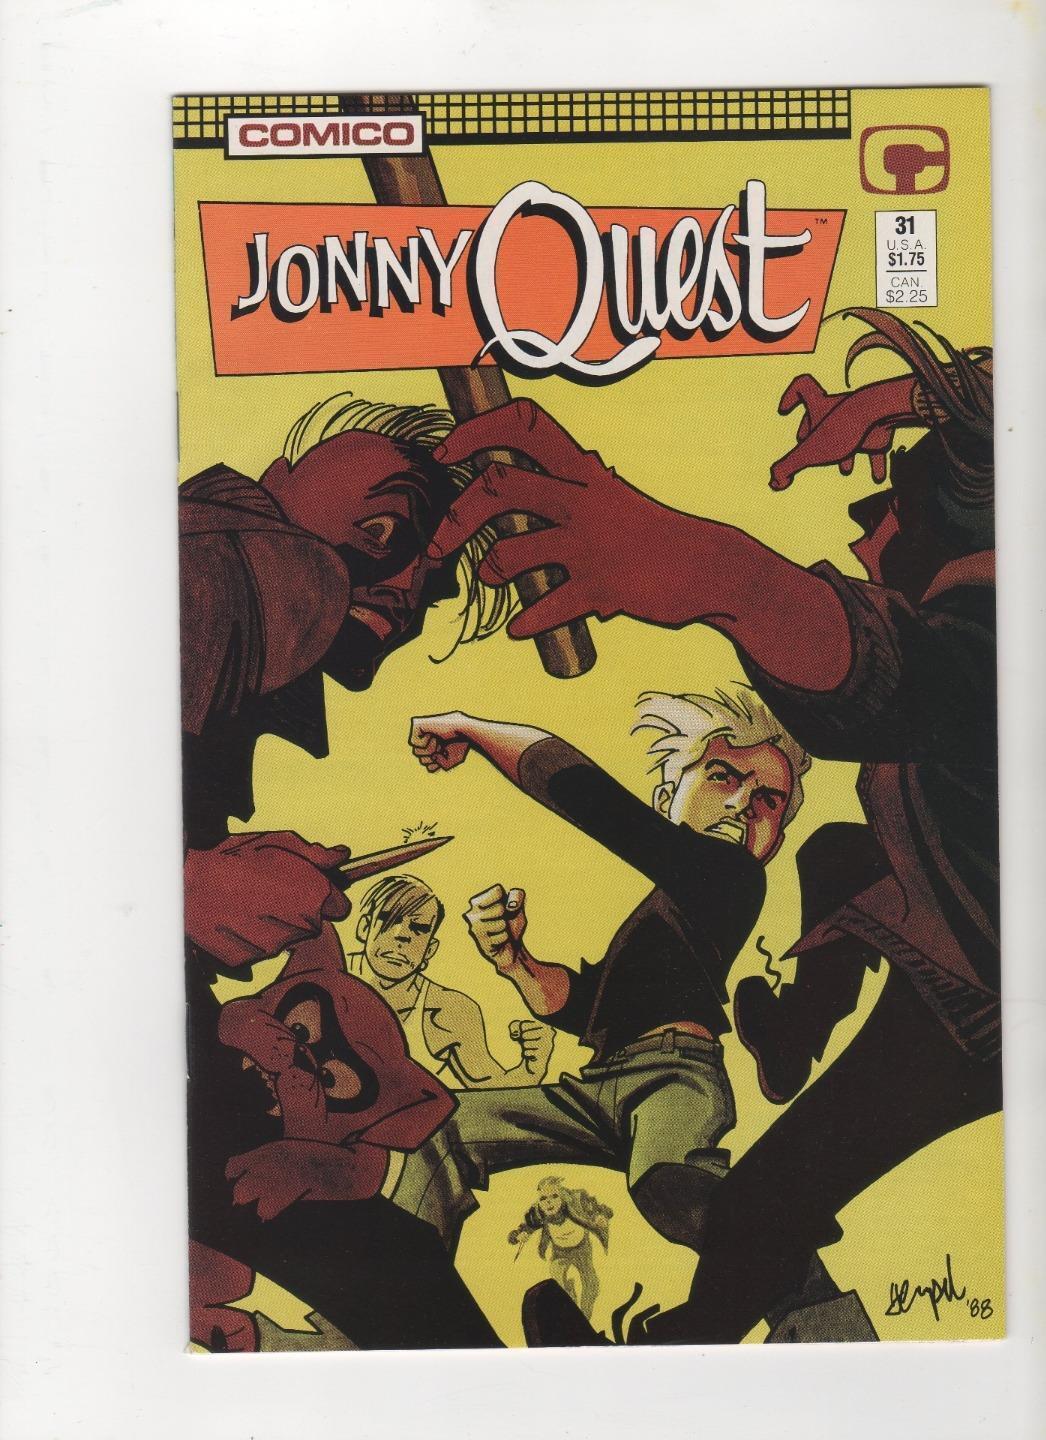 Jonny Quest #31, Comico, Final Issue, NM 9.4, 1st Print, 1988, See Scans